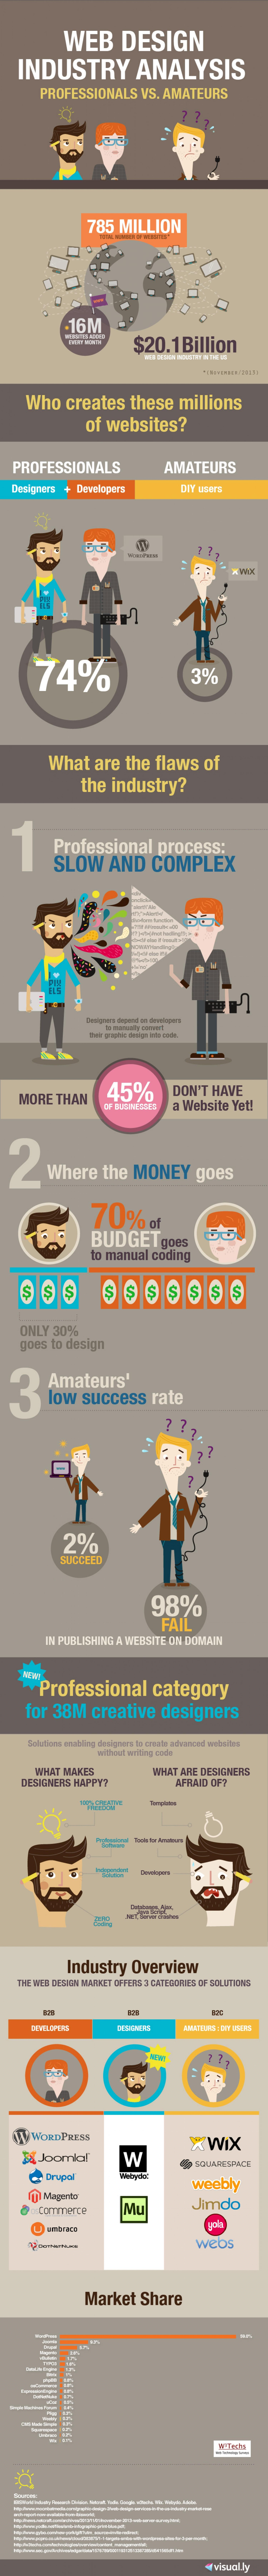 Web Design Industry Analysis [Infographic]